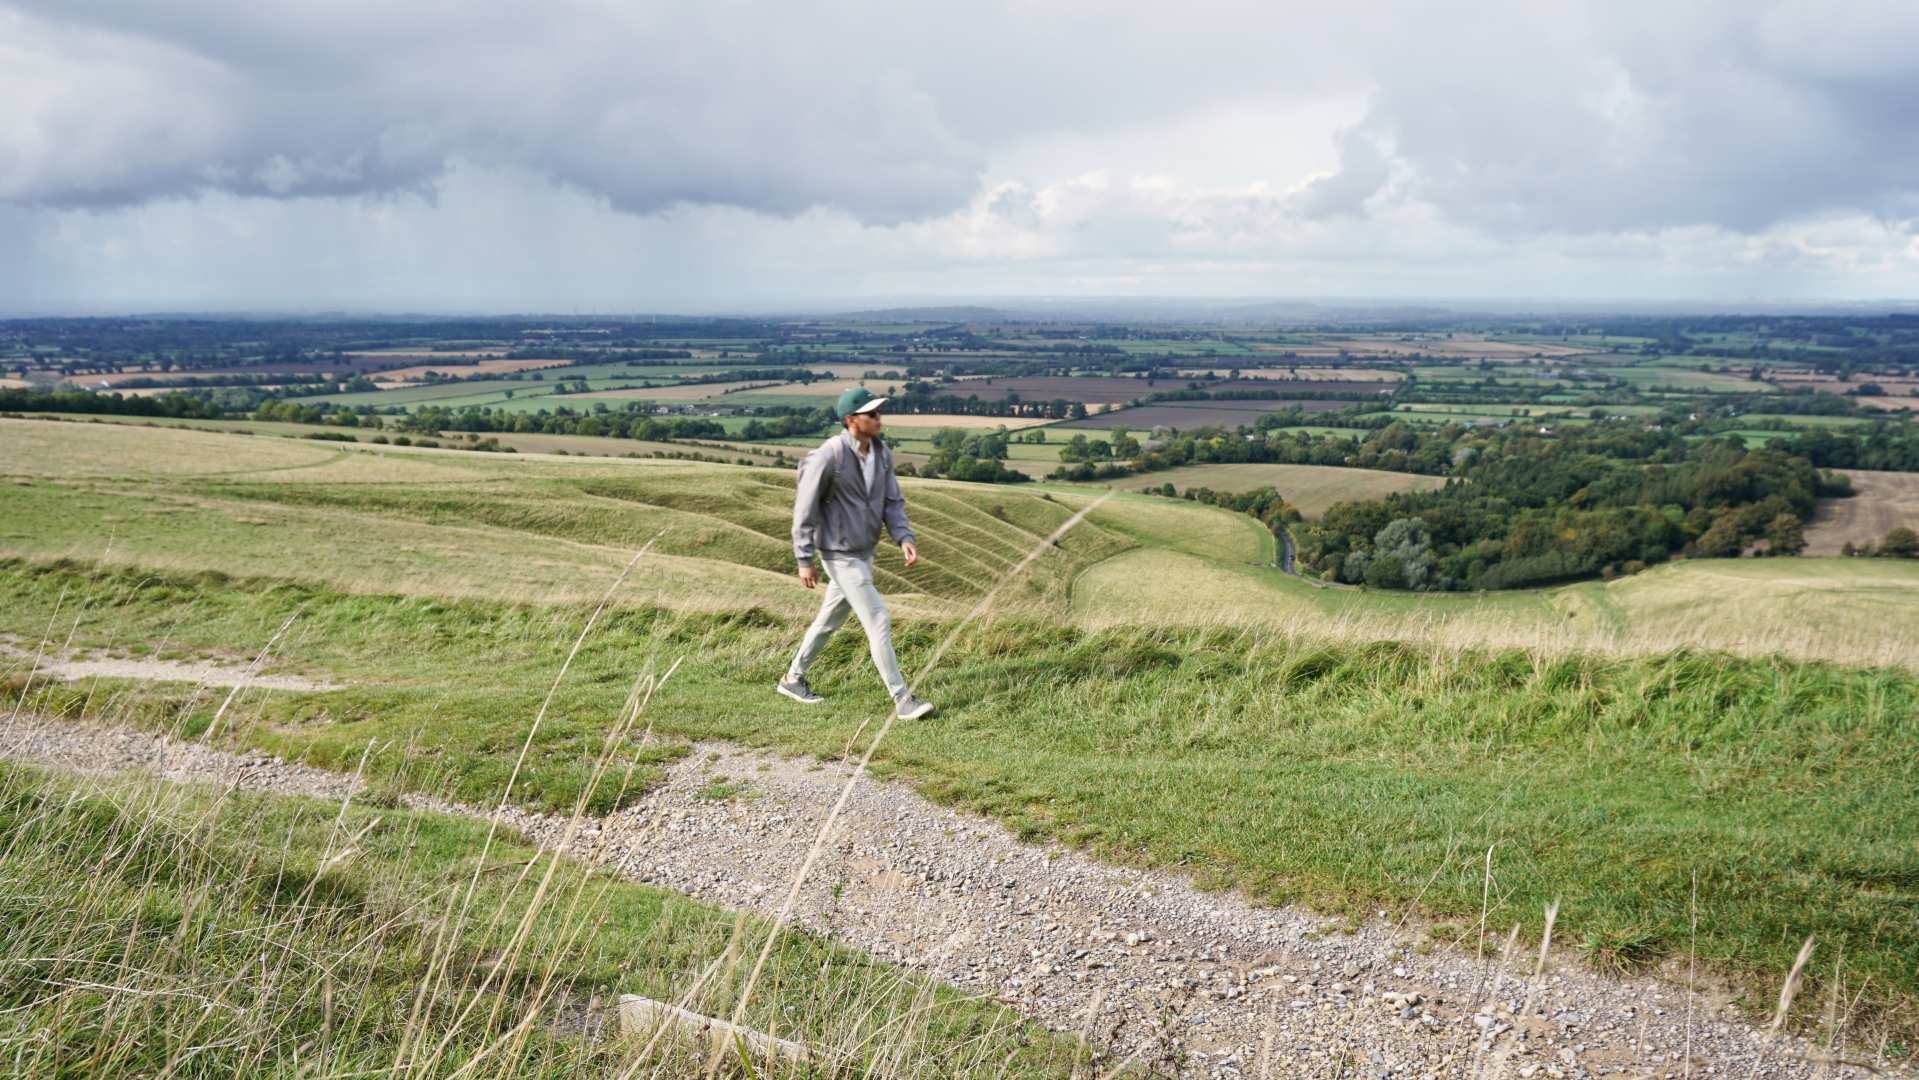 Walking on the White Horse Hill - Walking on the White Horse Hill